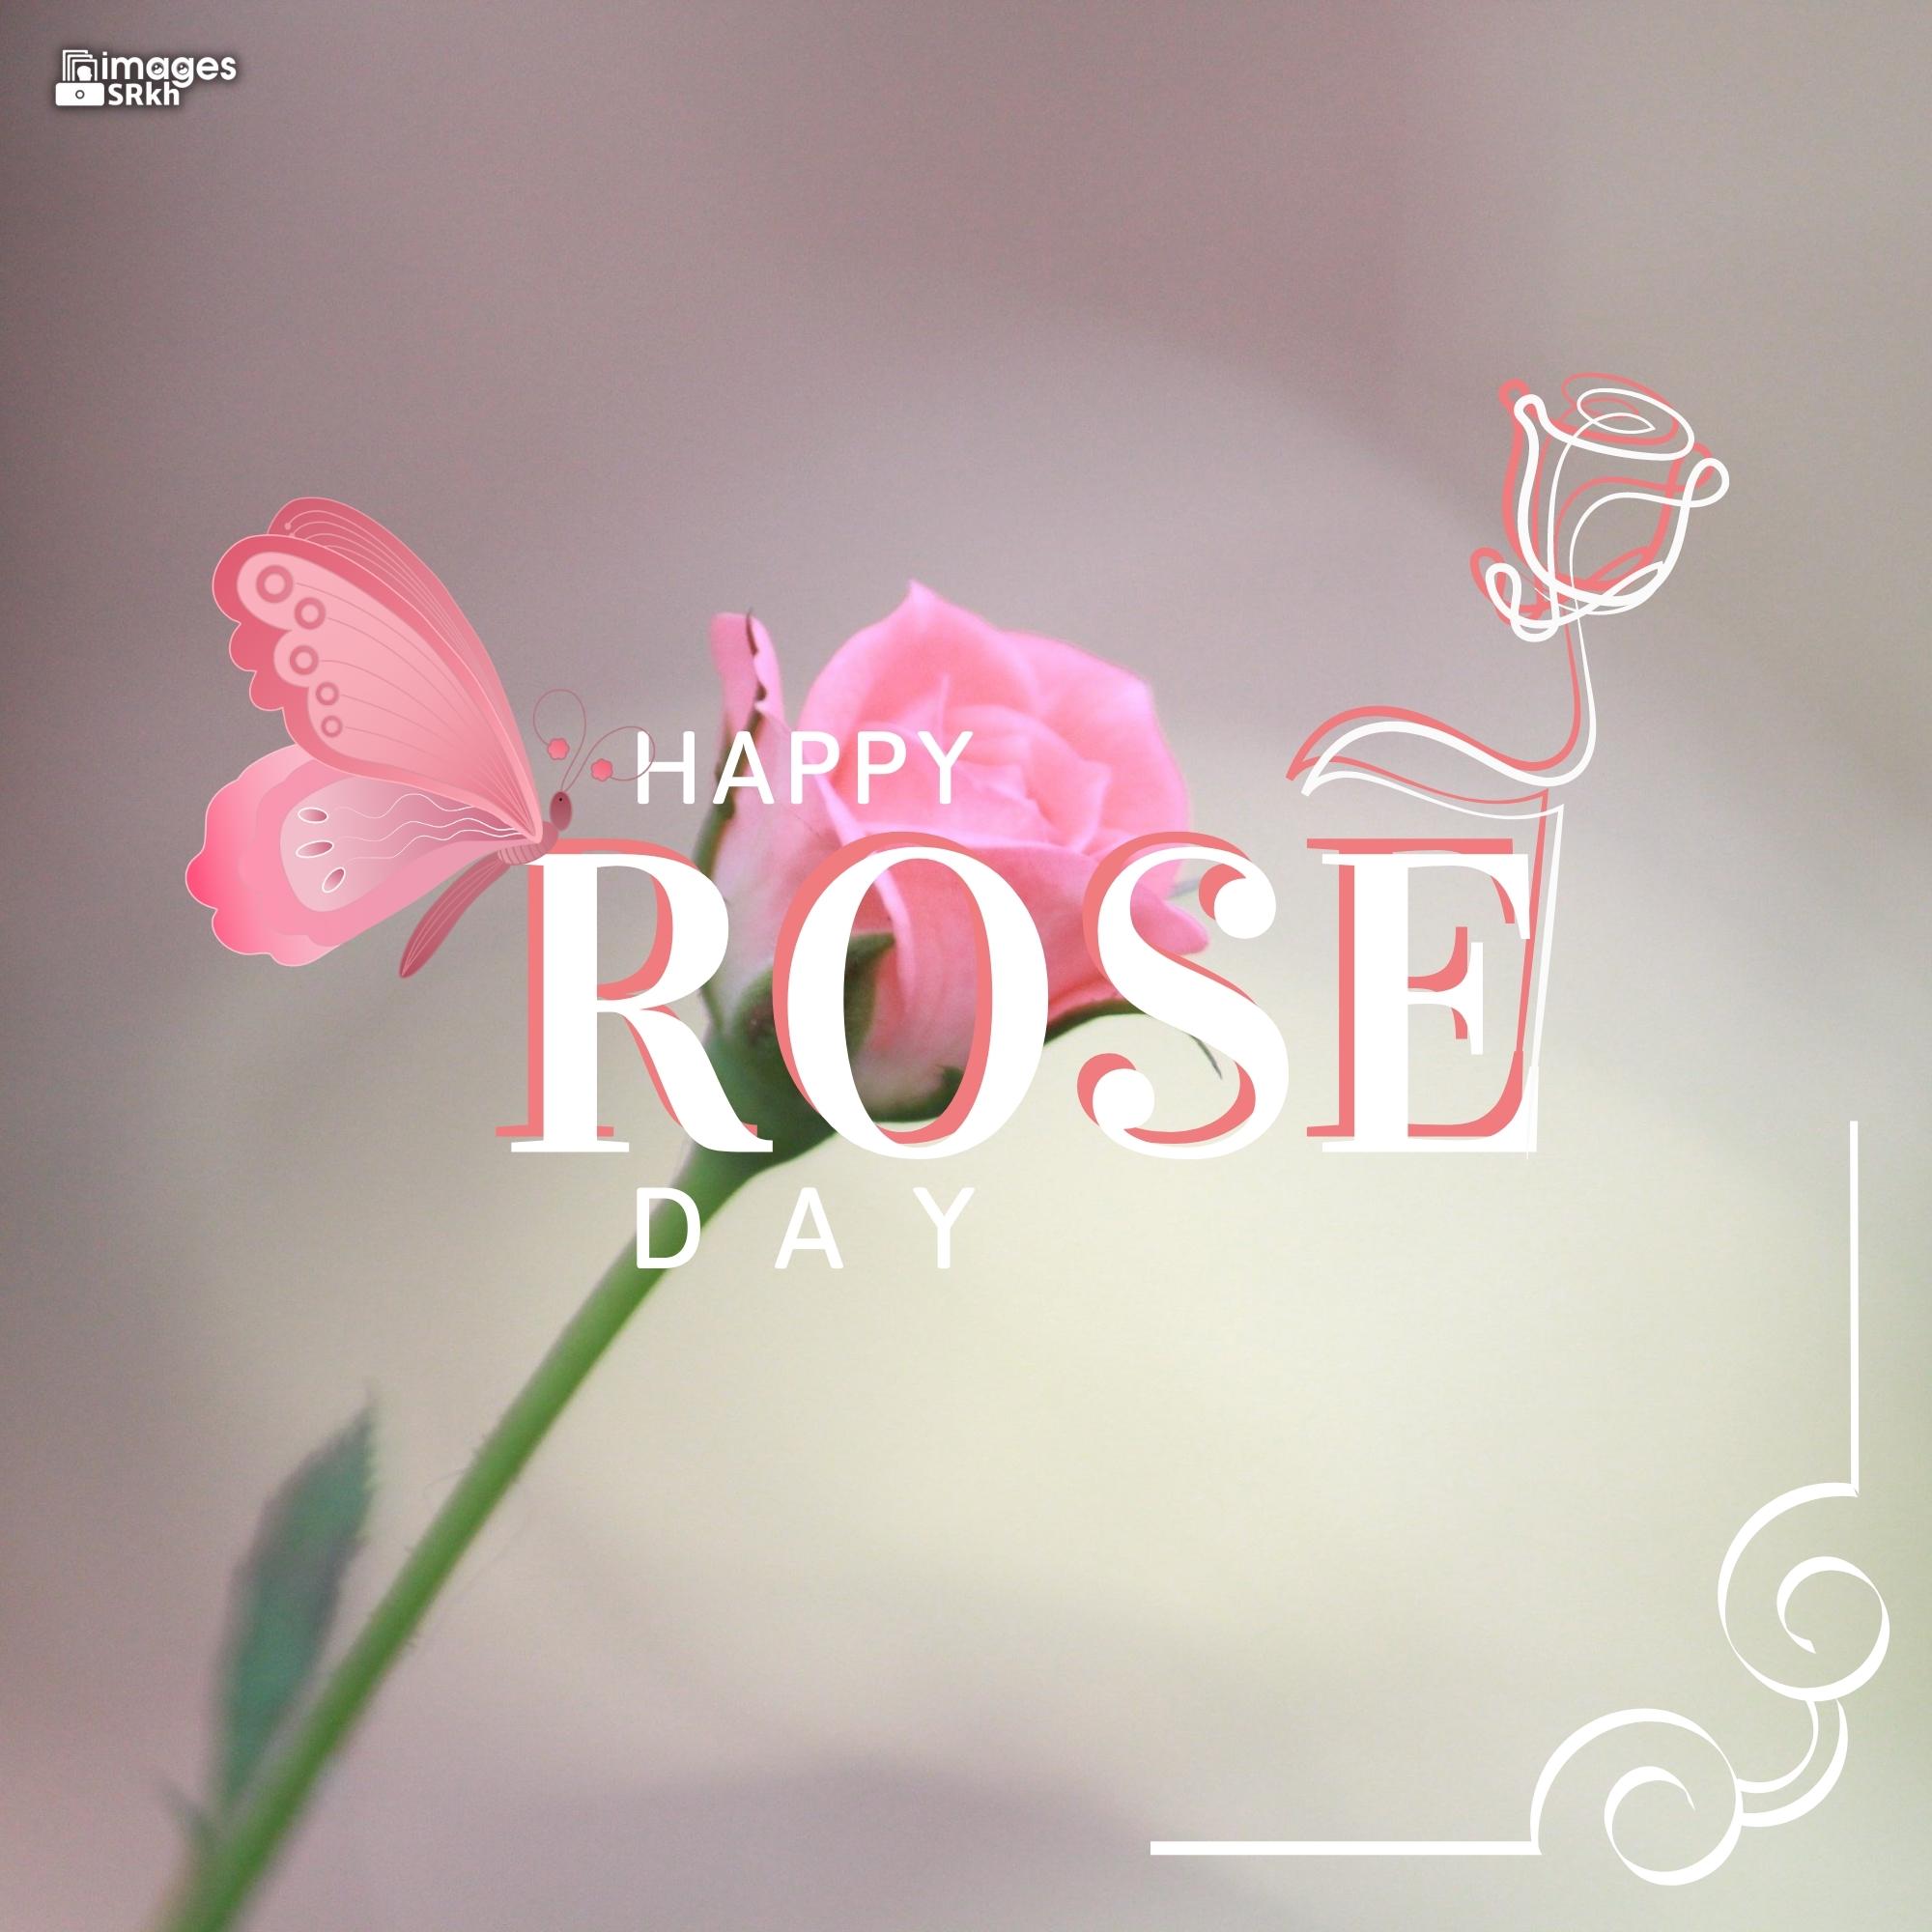 Happy Rose Day Image Hd Download (107)